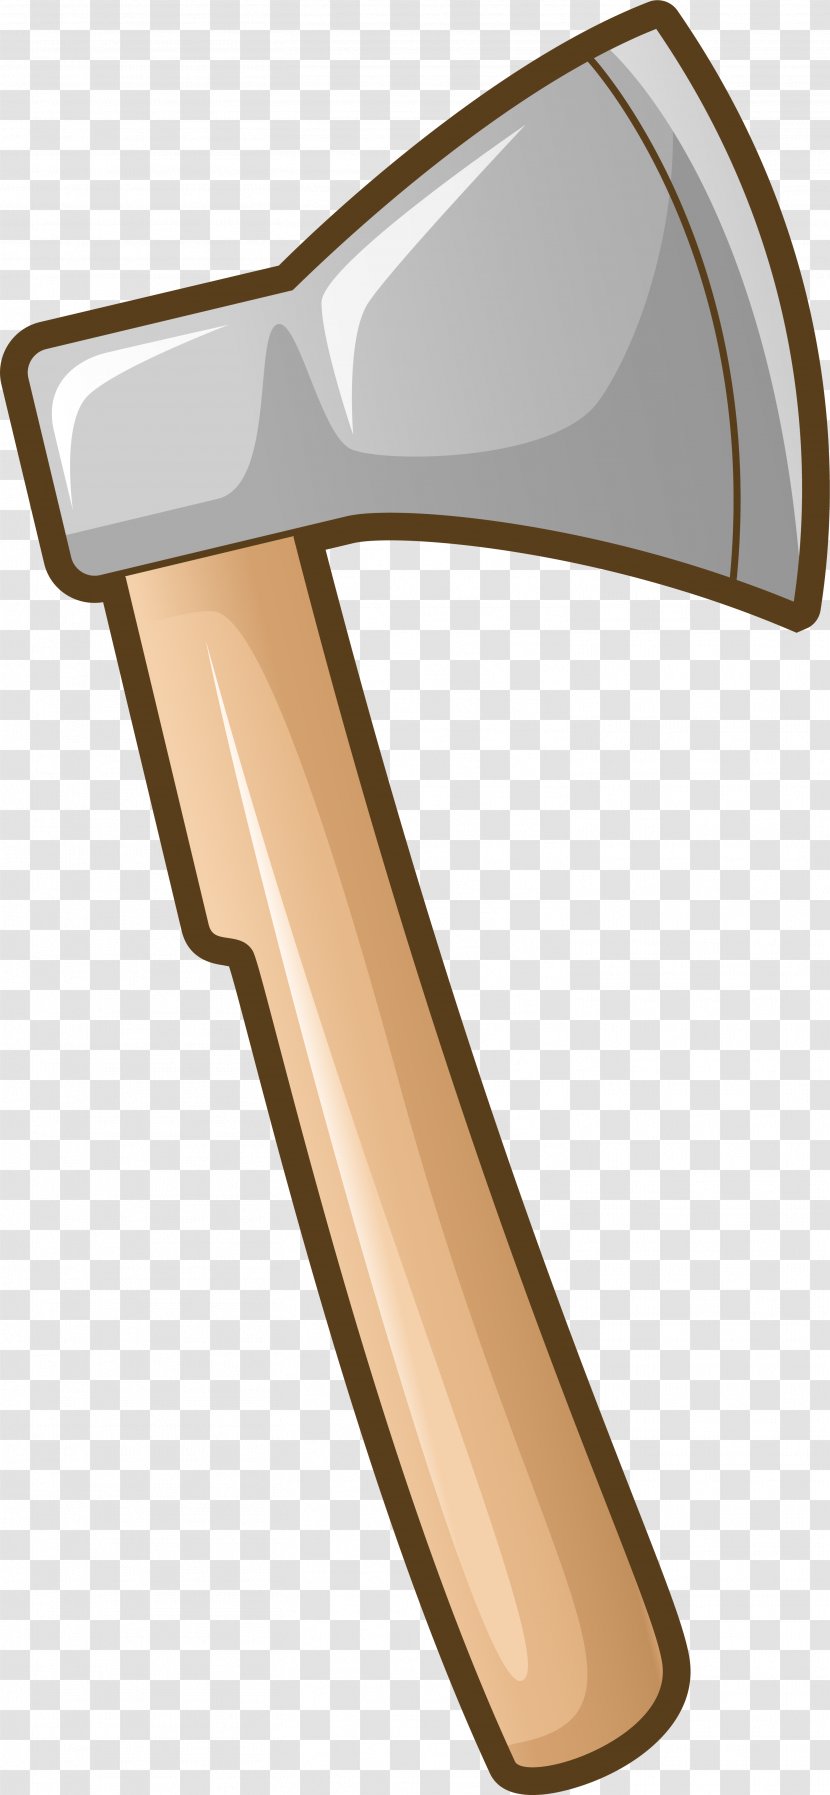 Axe Woodworking Tool - Wood - Simple Grey Transparent PNG